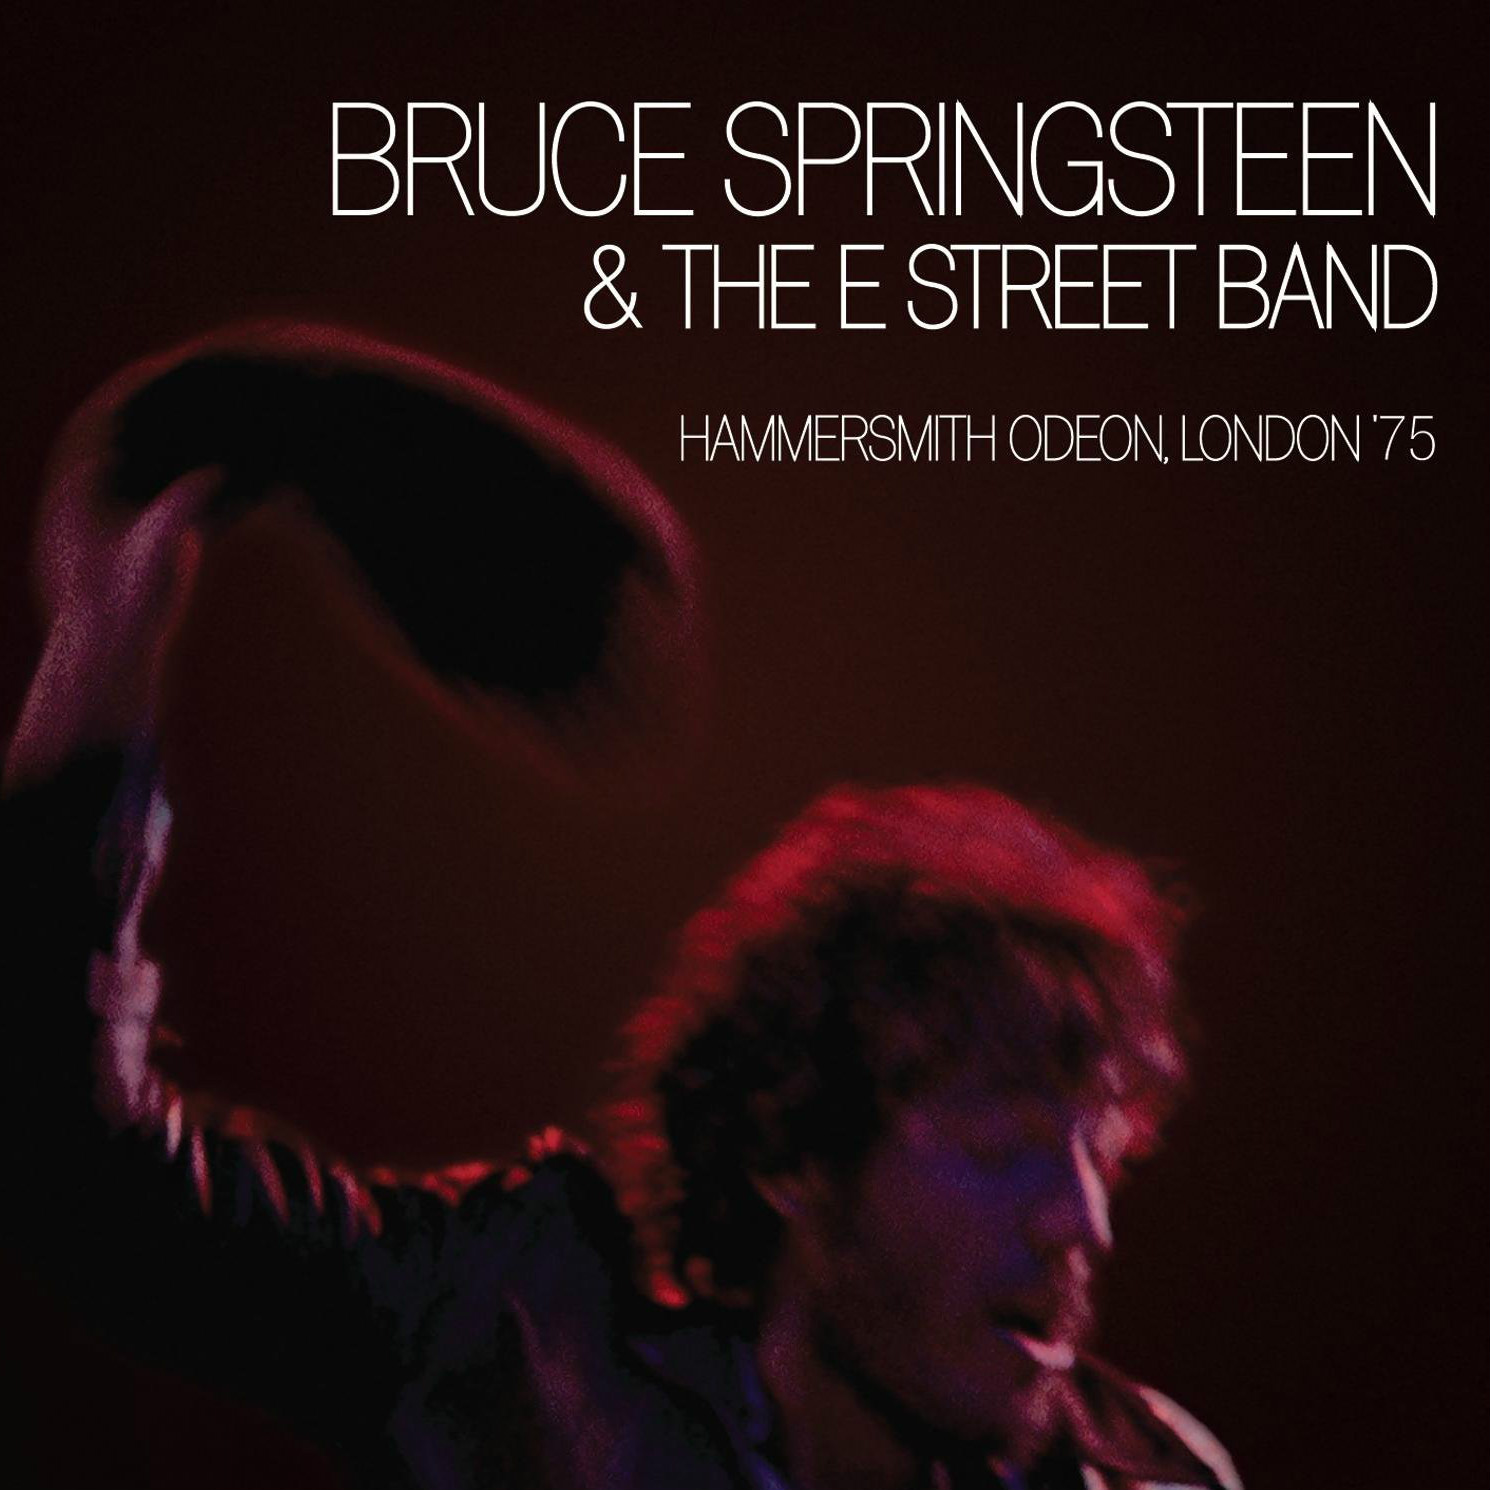 BRUCE SPRINGSTEEN & THE E STREET BAND | 'Hammersmith Odeon London '75'